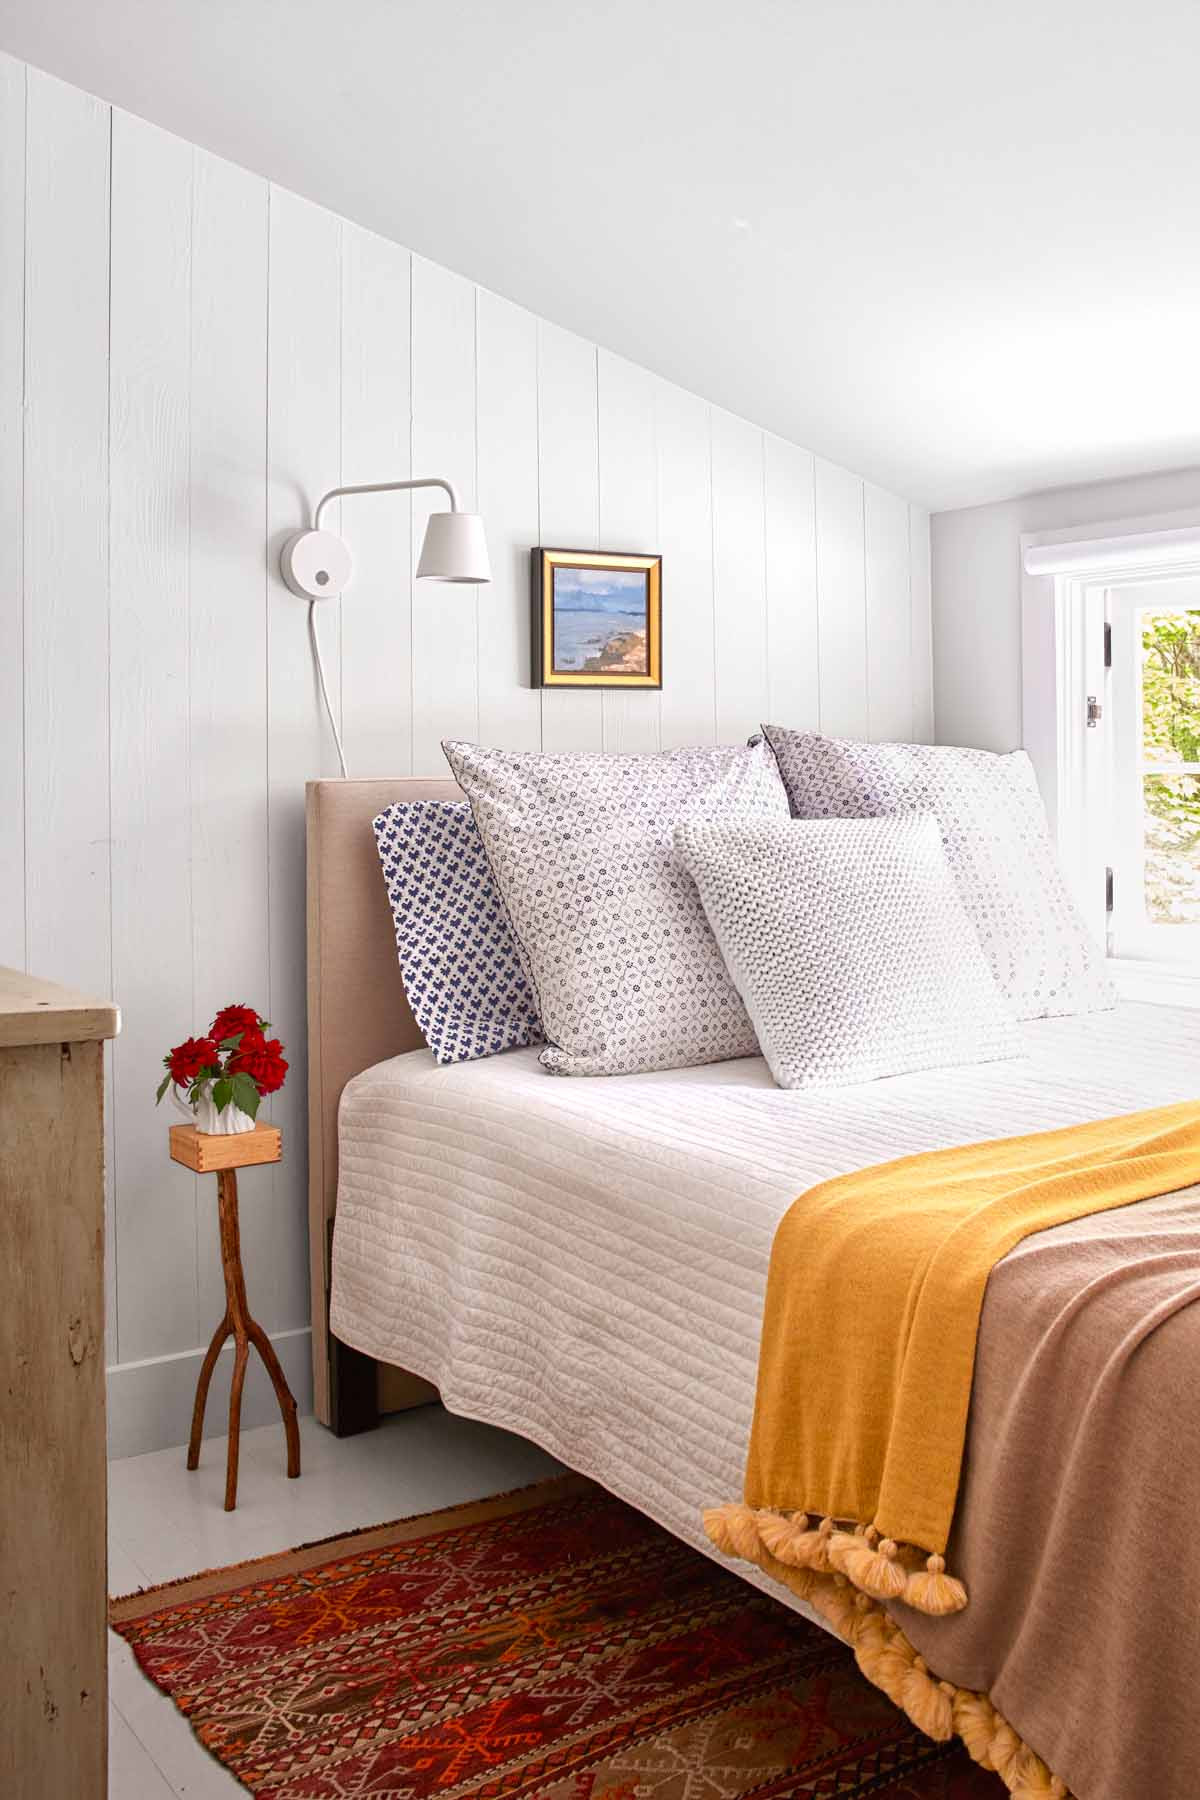 Kids Guest Room Ideas
 30 Guest Bedroom Decor Ideas for Guest Rooms